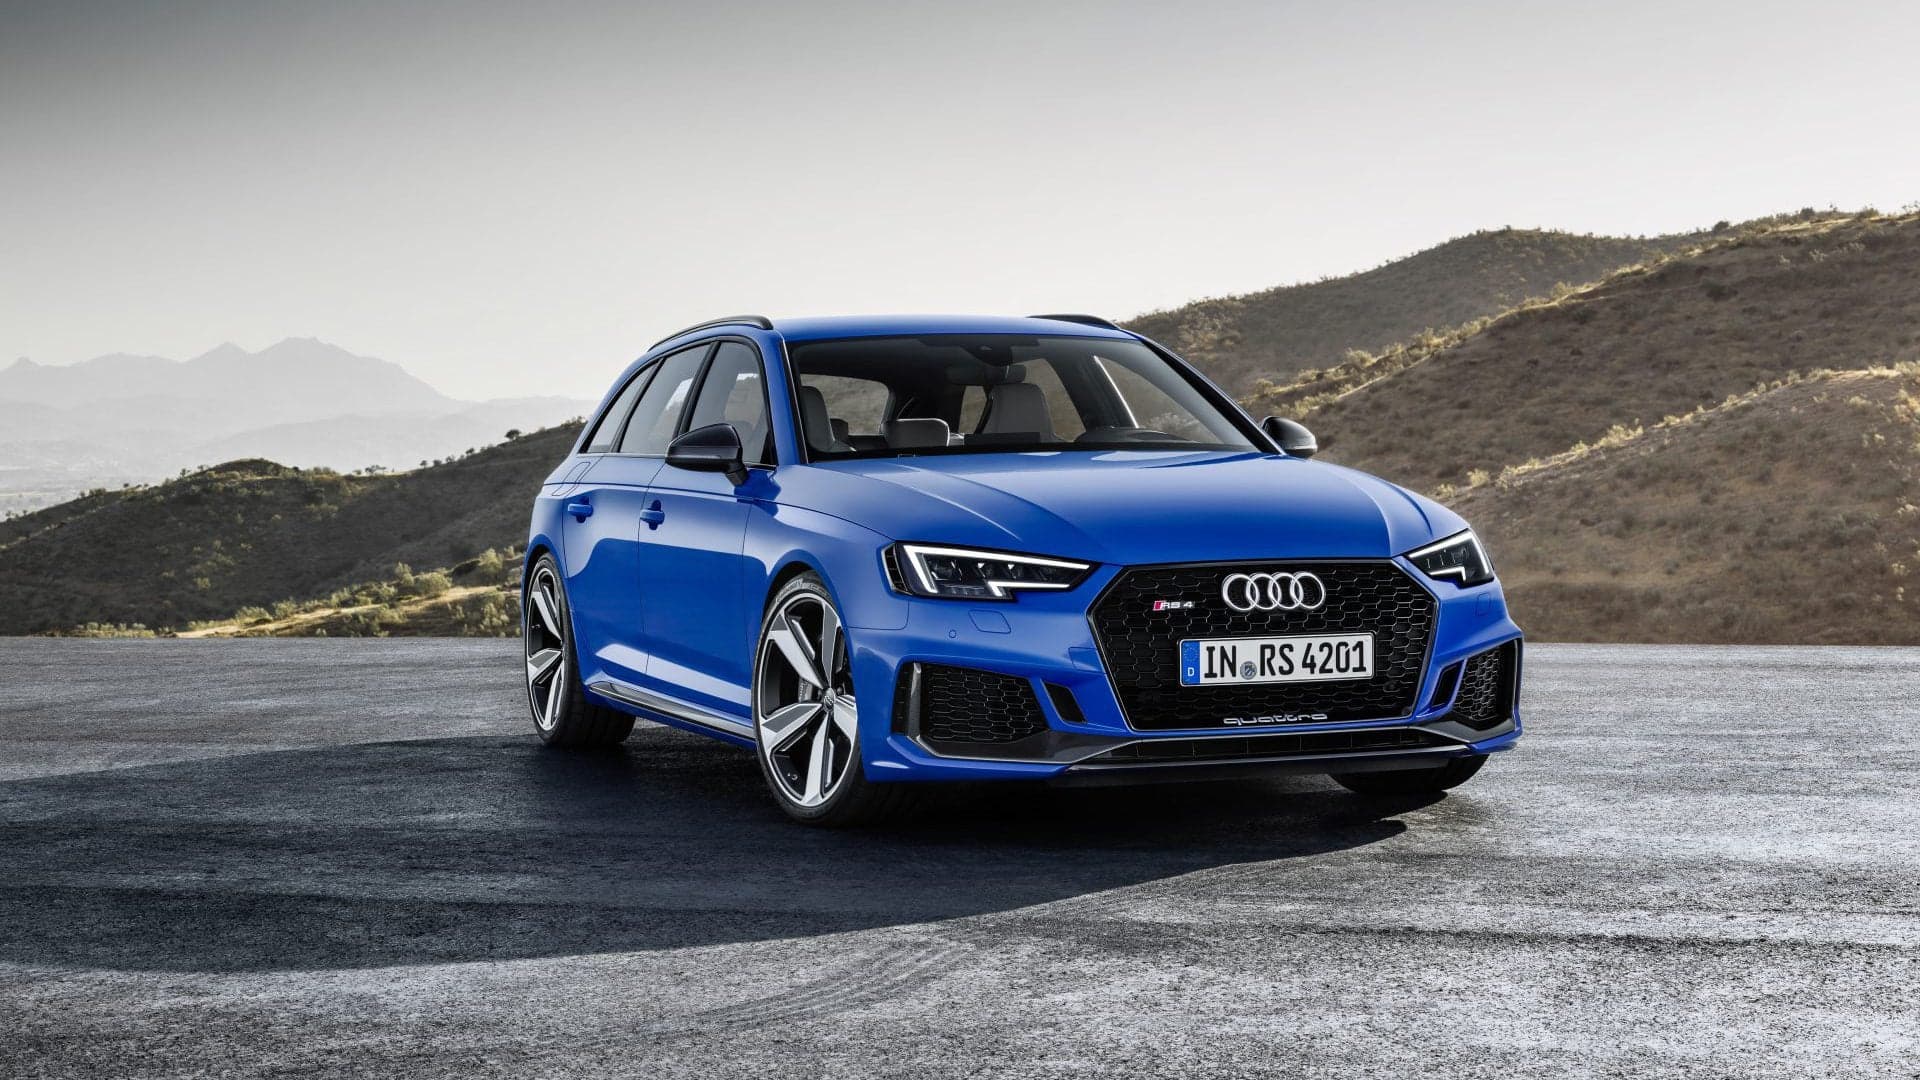 Audi Might Bring the RS 4 and RS 6 Avant Stateside If We Plead Hard Enough